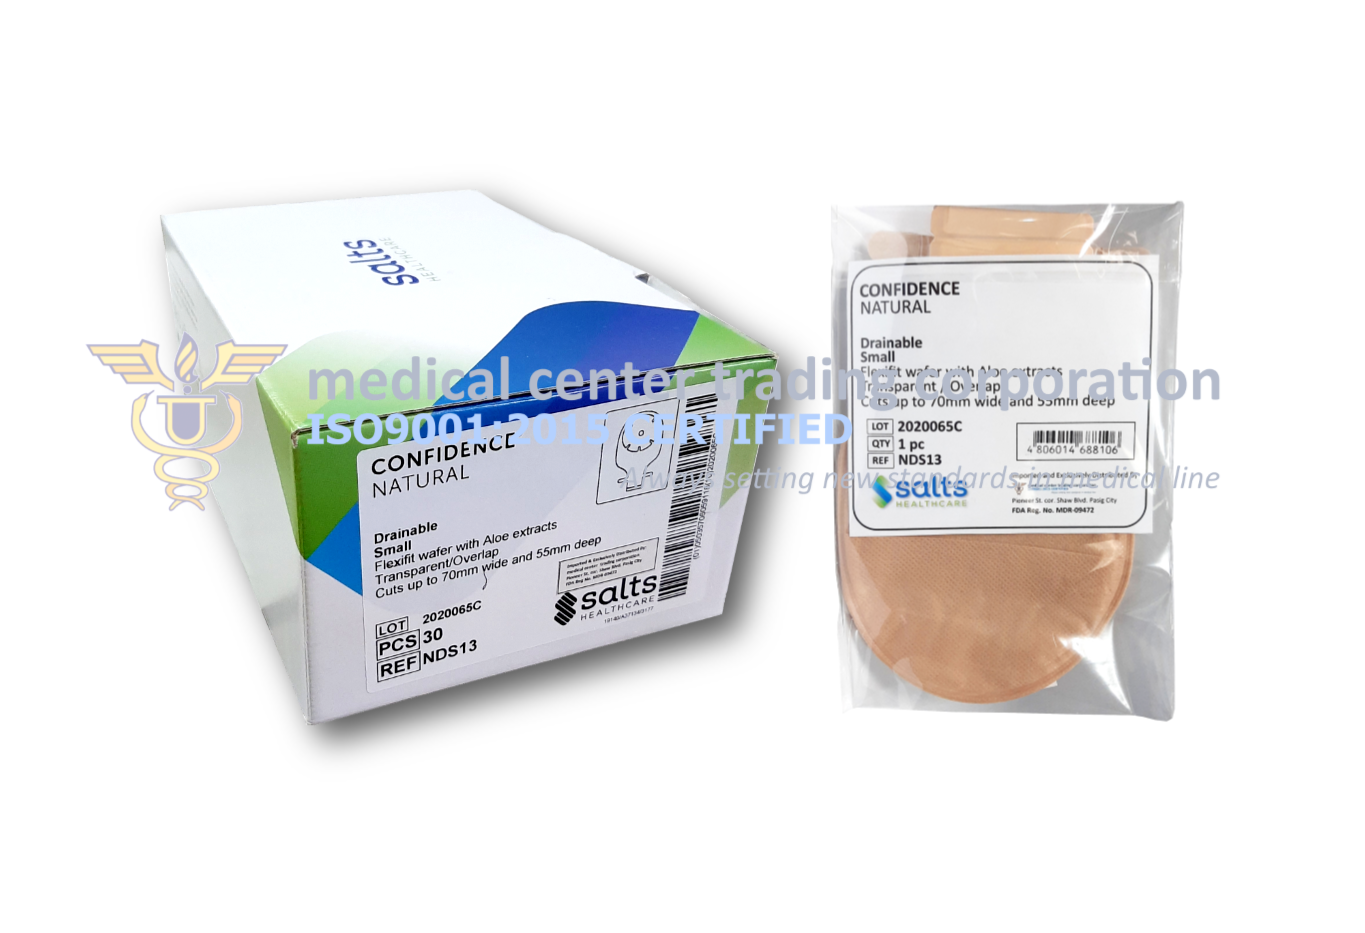 Salts Confidence Natural Drainable - Drainable colostomy pouch.